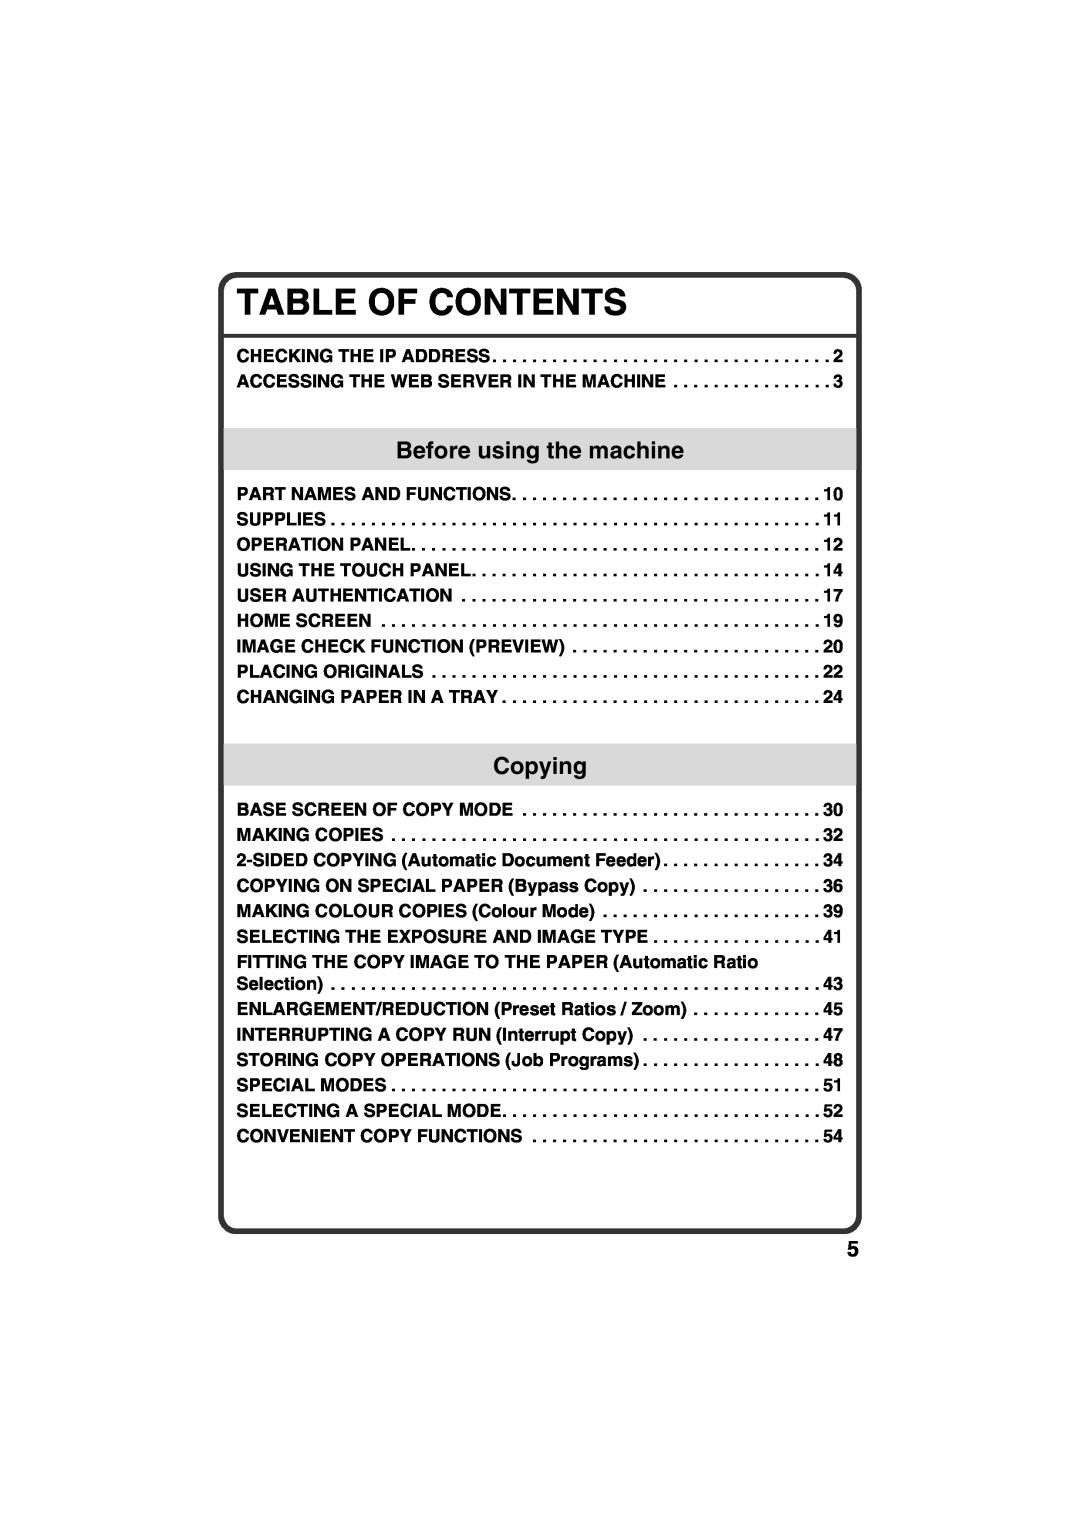 Sharp MX-C381, MX-C311 Table Of Contents, Before using the machine, Copying, Base Screen Of Copy Mode Making Copies 